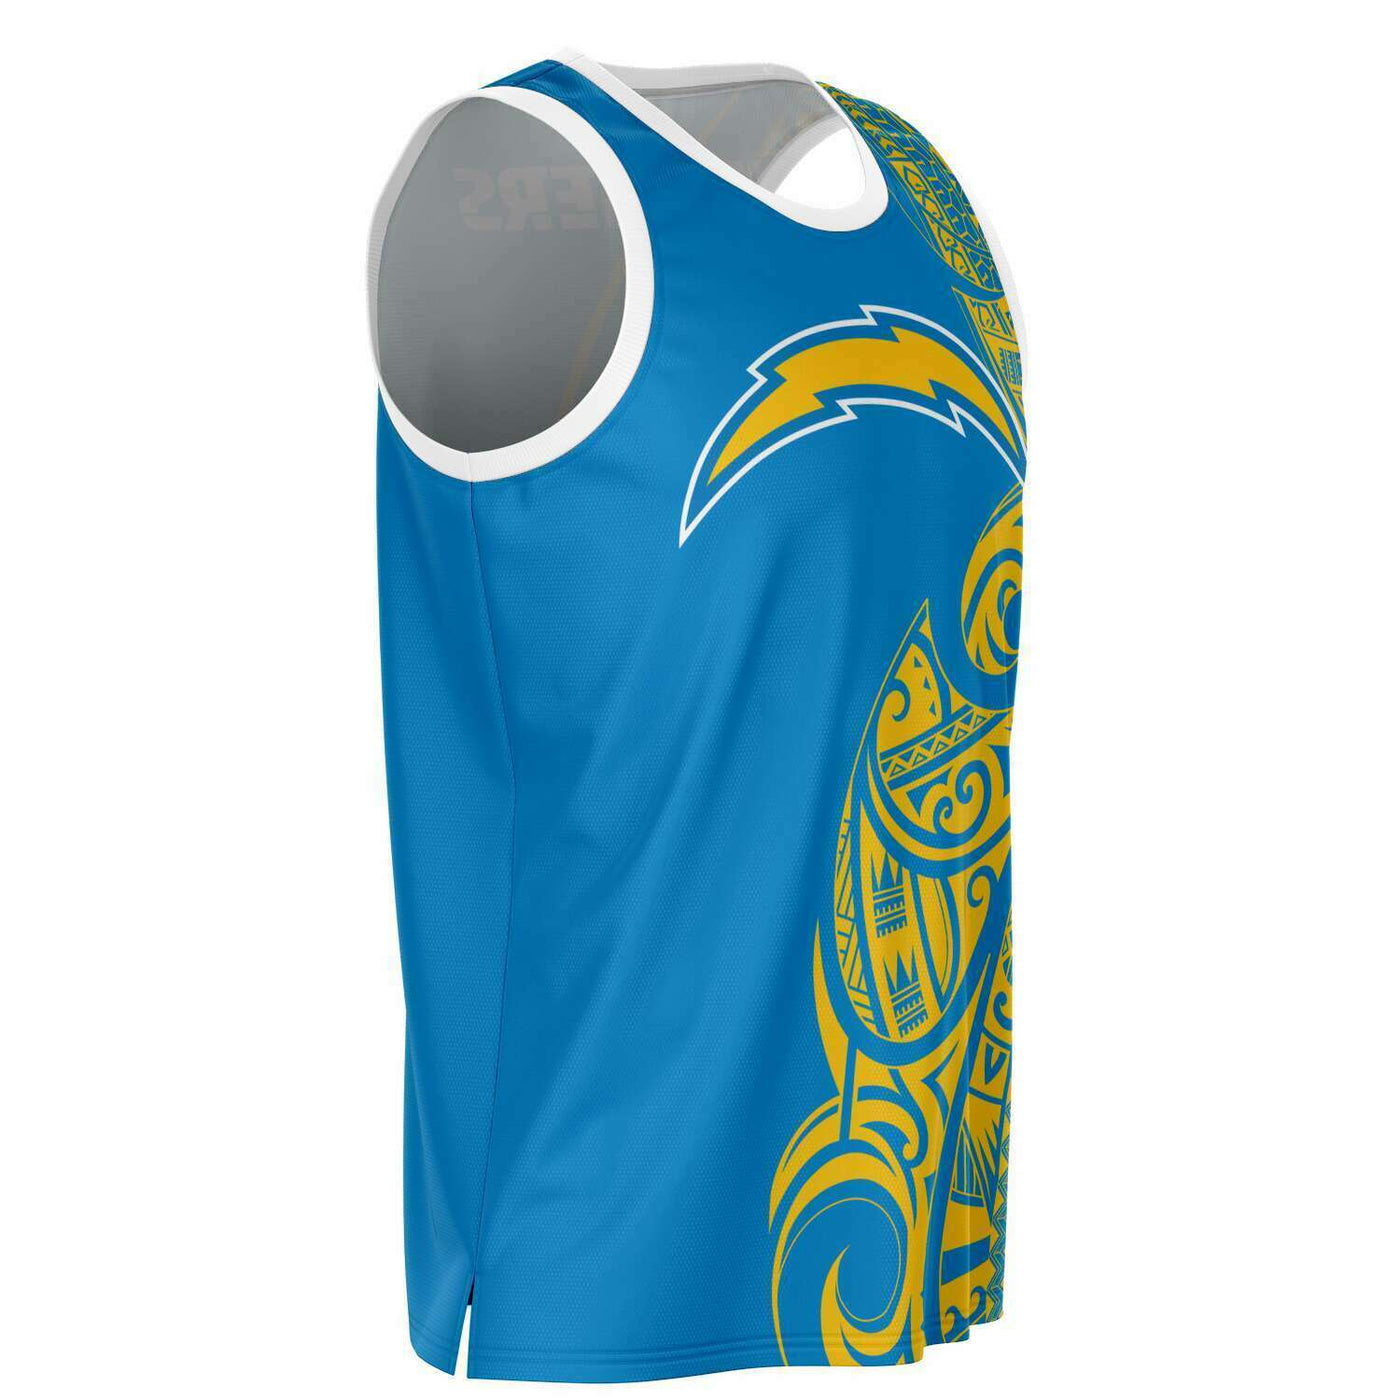 Subliminator Los Angeles Chargers Basketball Jersey